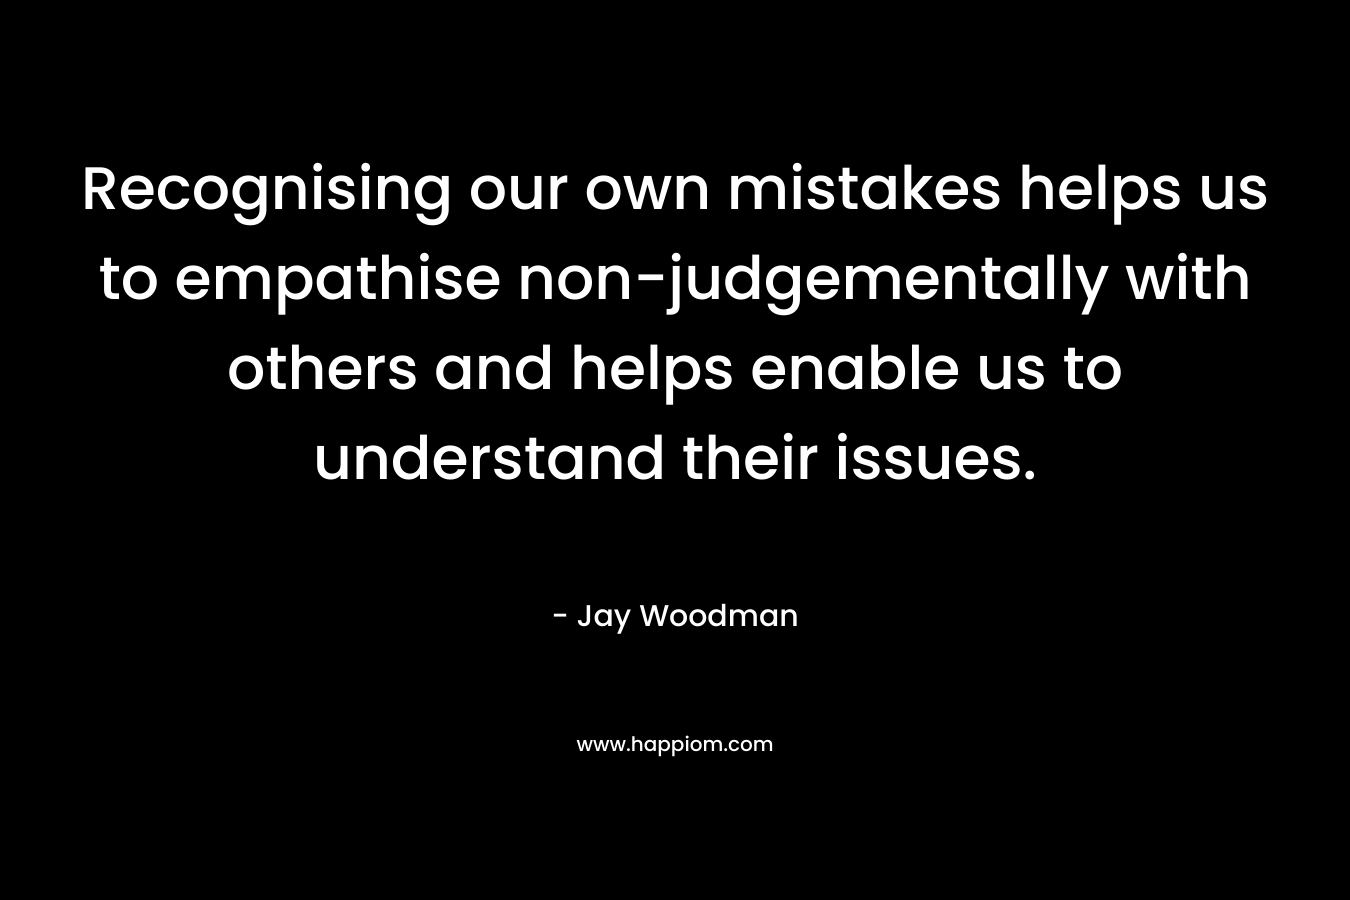 Recognising our own mistakes helps us to empathise non-judgementally with others and helps enable us to understand their issues.